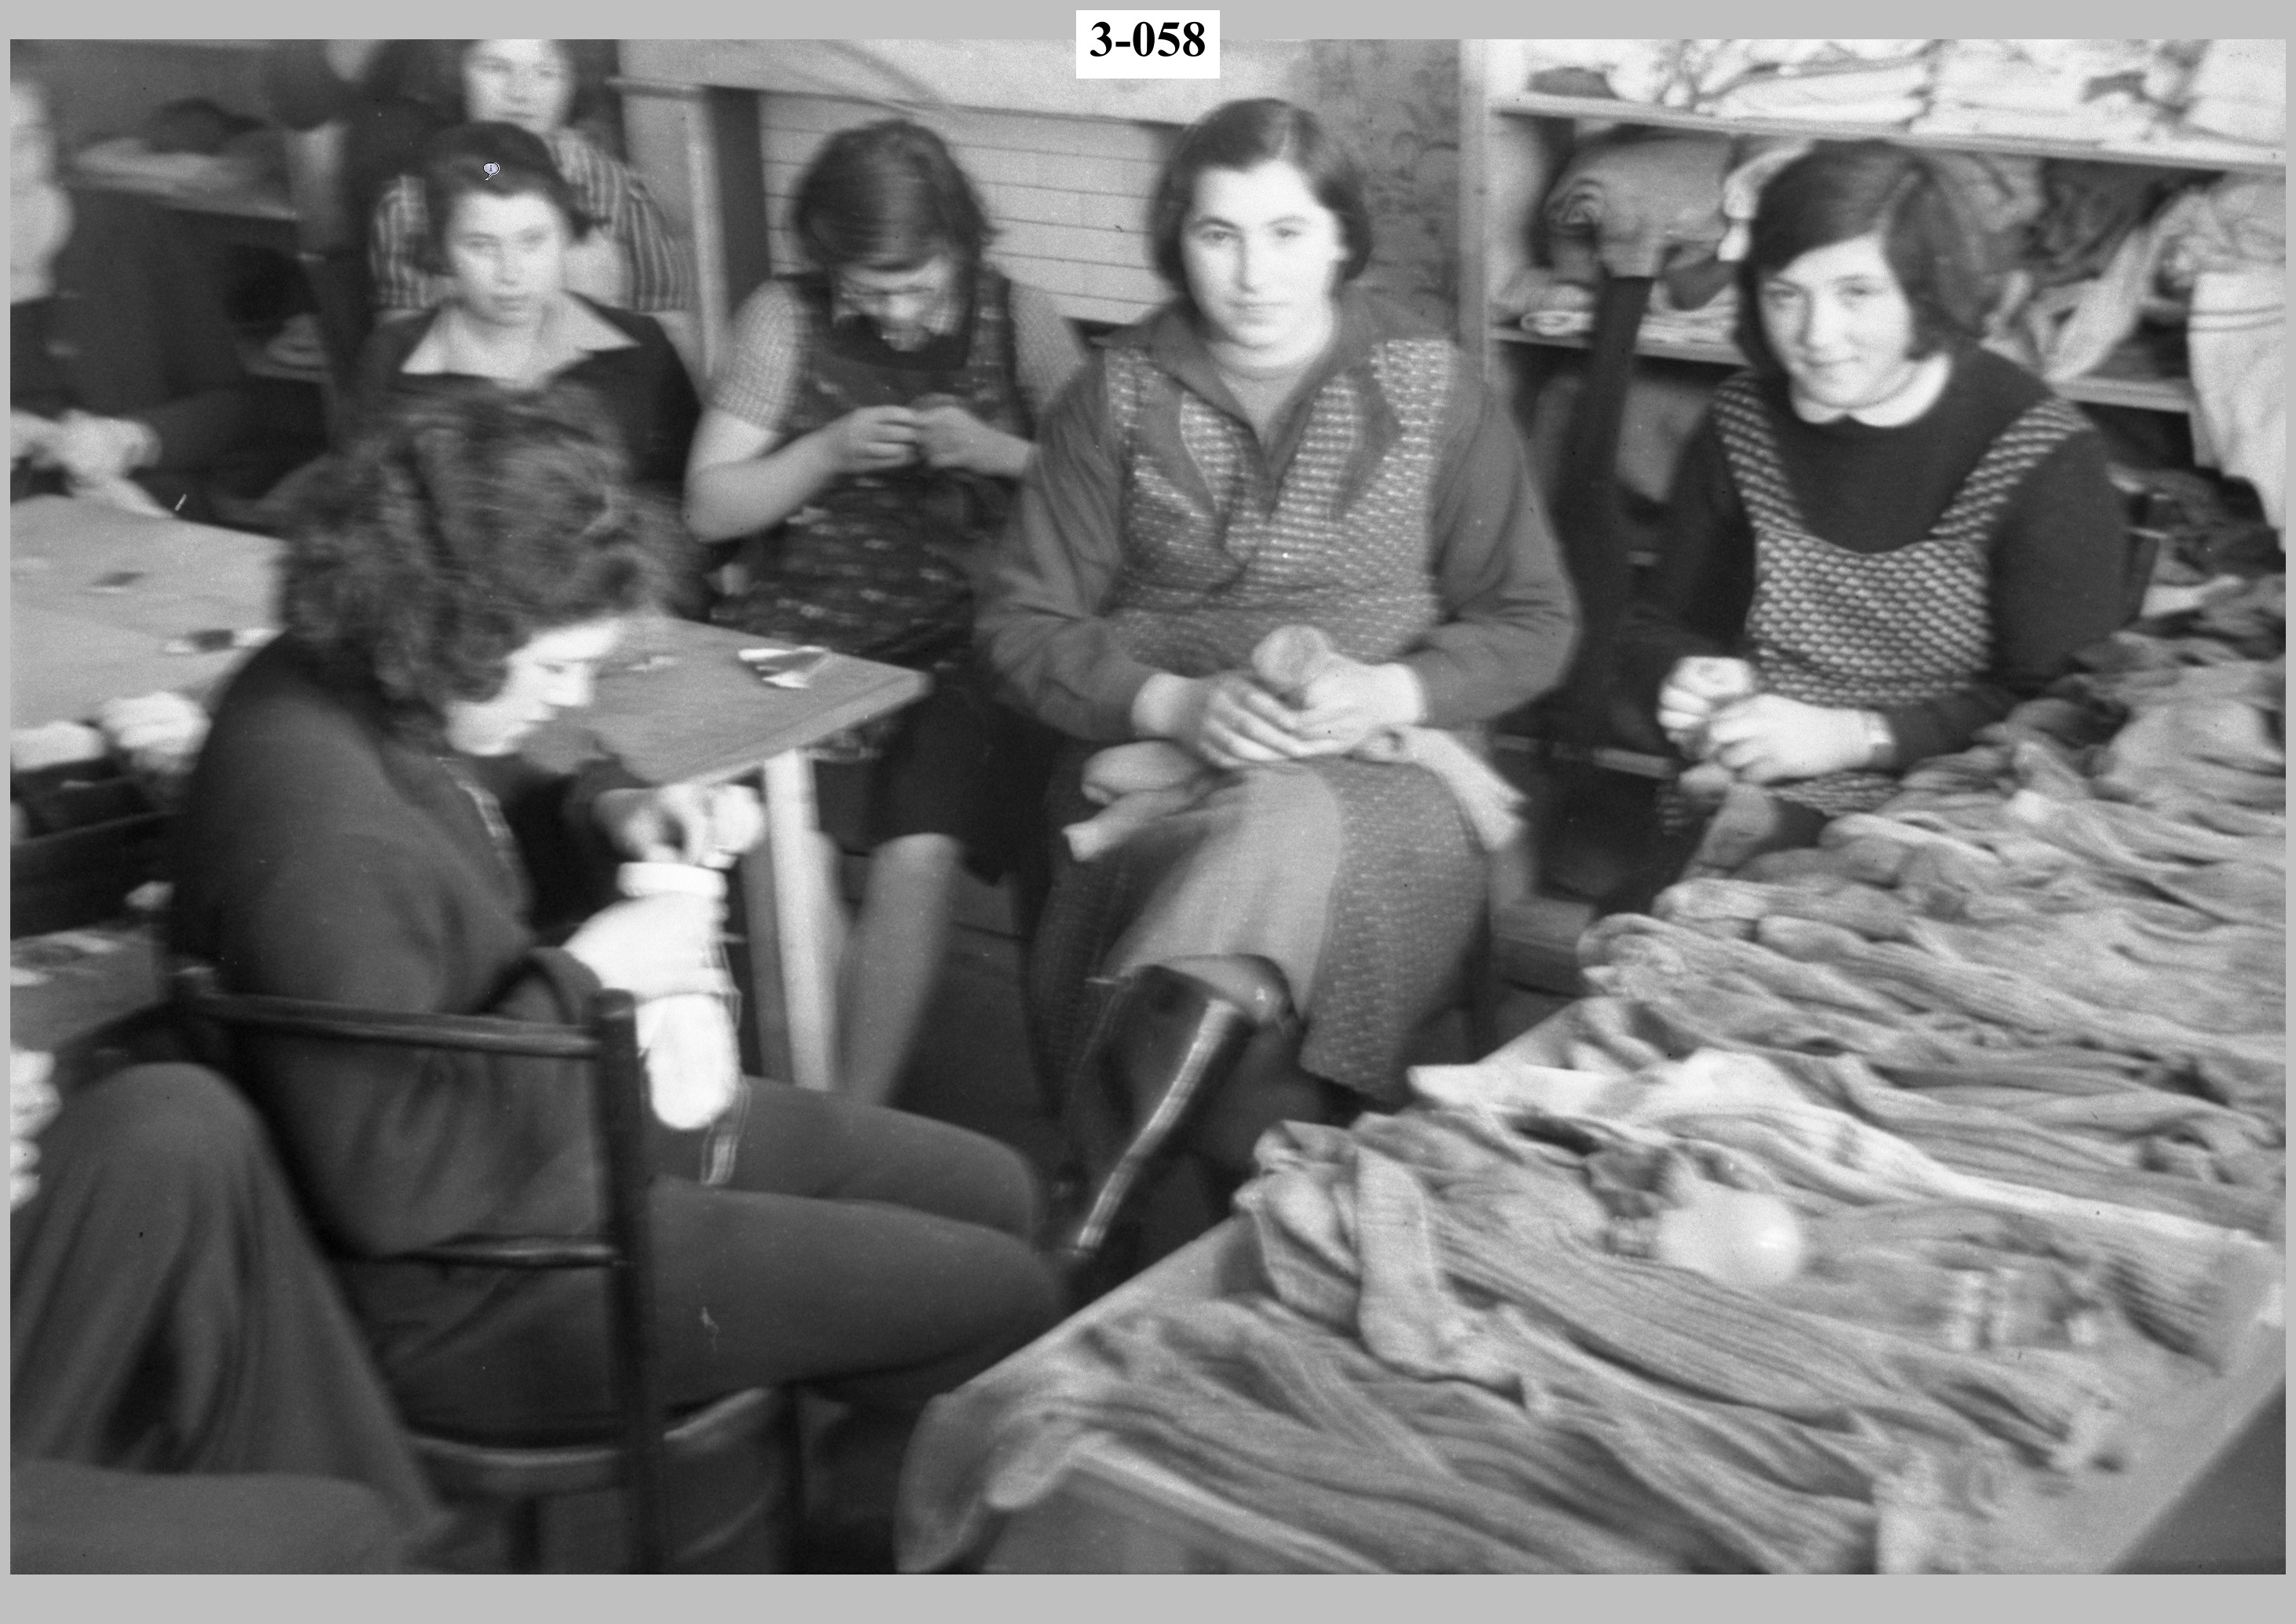 Ester Golan and others sewing.jpg